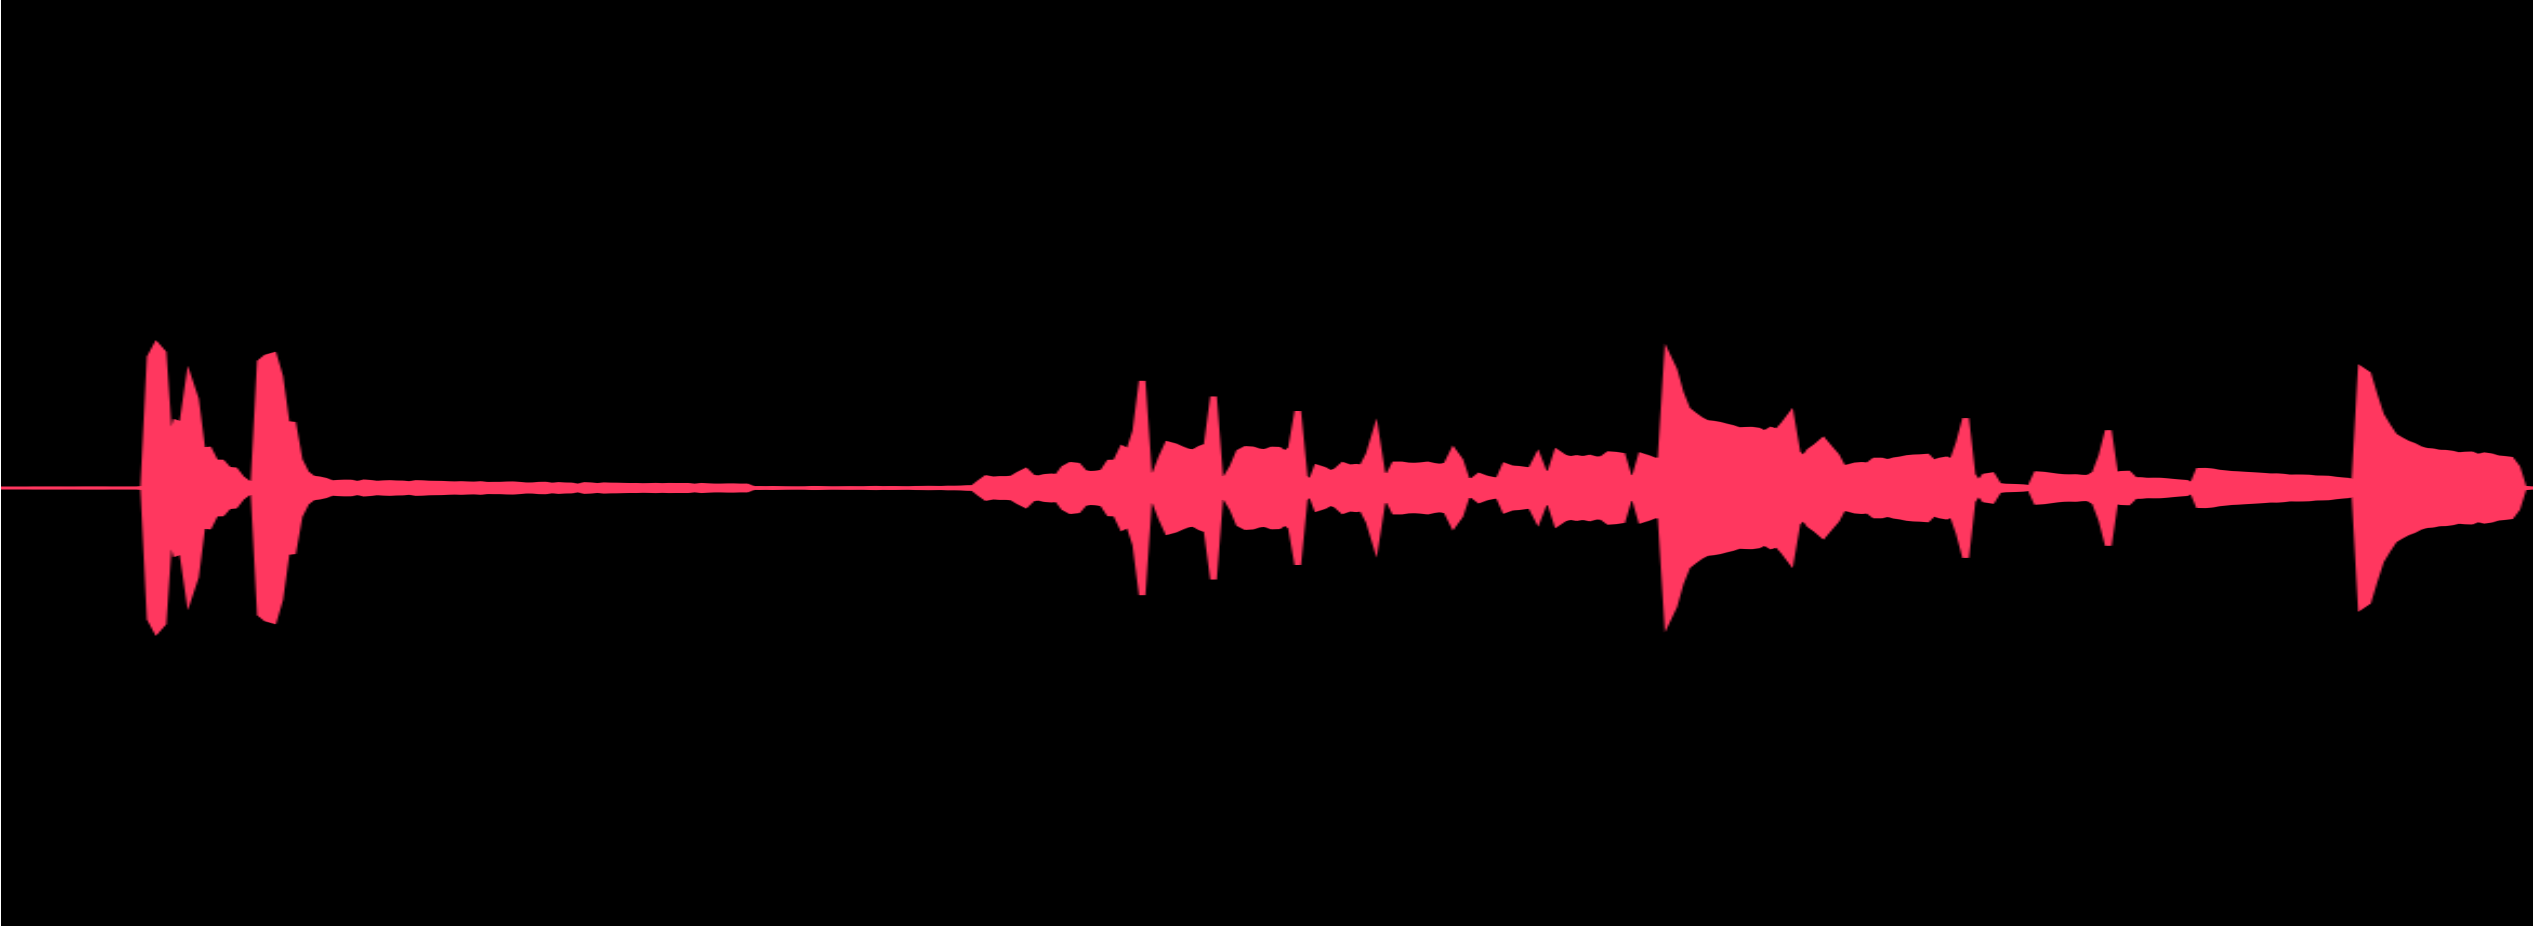 A screenshot of the audio waveform in this example